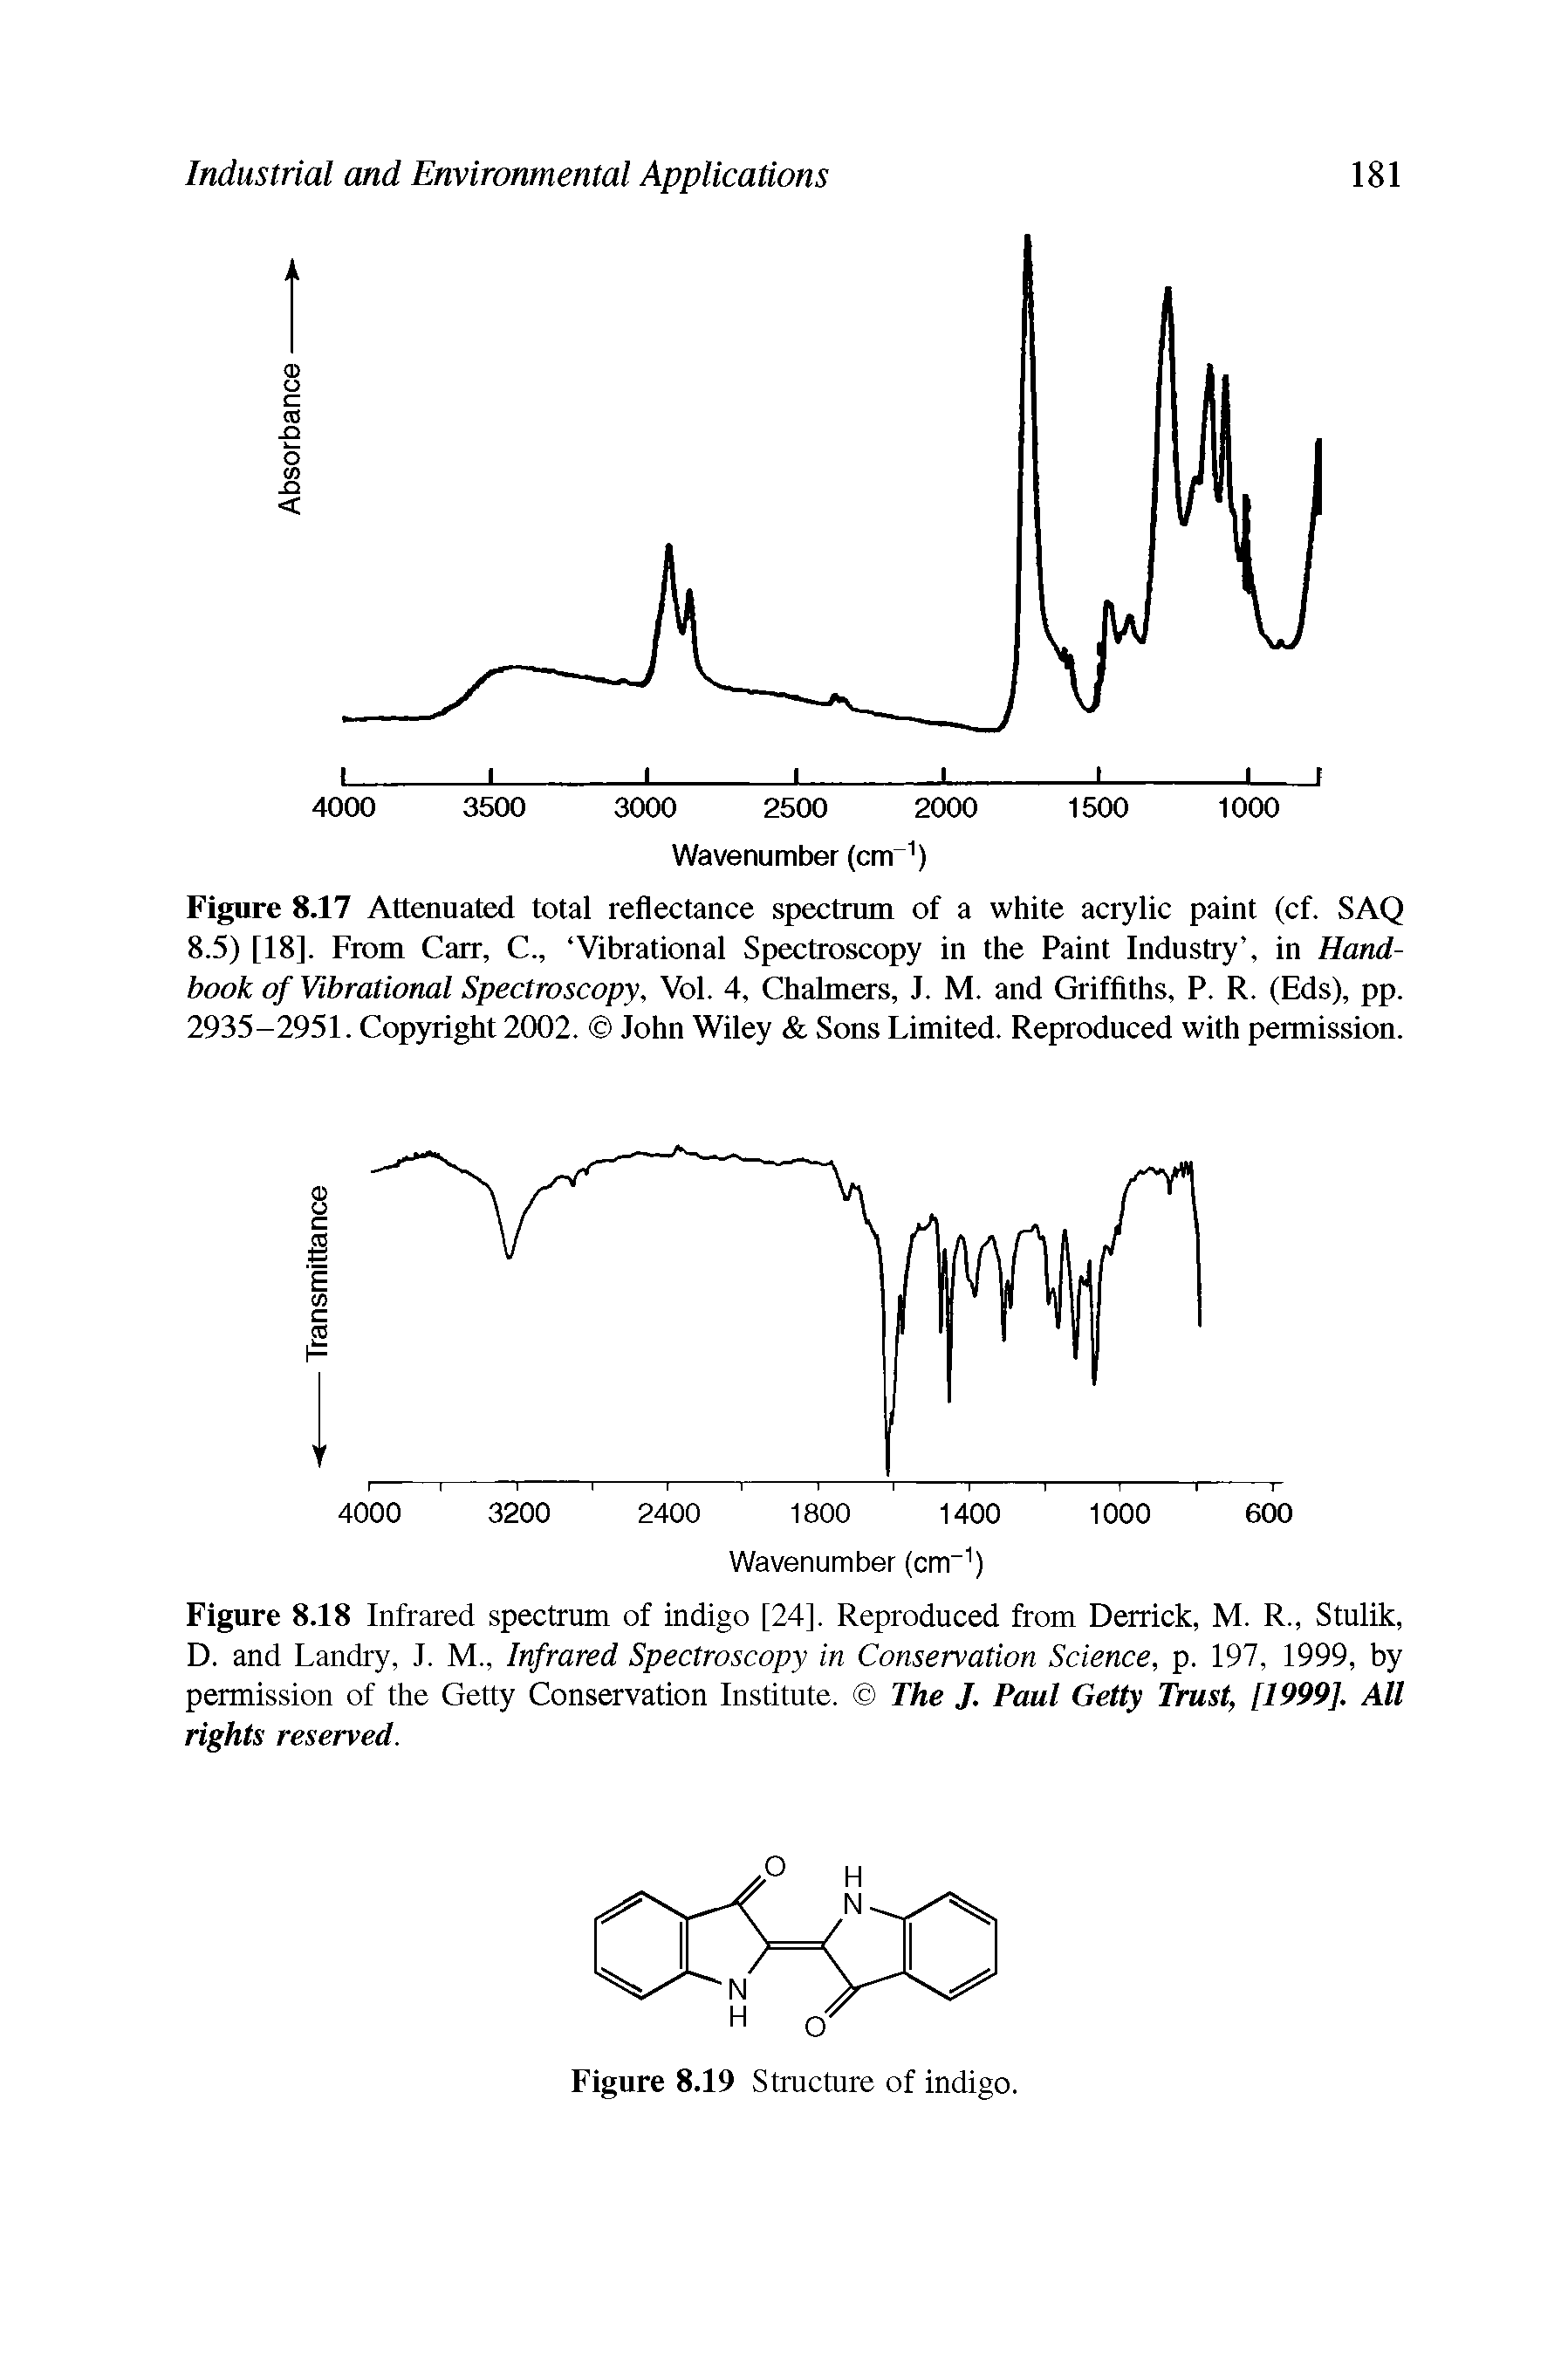 Figure 8.17 Attenuated total reflectance spectrum of a white acrylic paint (cf. SAQ 8.5) [18]. From Carr, C., Vibrational Spectroscopy in the Paint Industry , in Handbook of Vibrational Spectroscopy, Vol. 4, ChahnCTs, J. M. and Griffiths, P. R. (Eds), pp. 2935-2951. Cop5night 2002. John Wiley Sons Limited. Reproduced with permission.